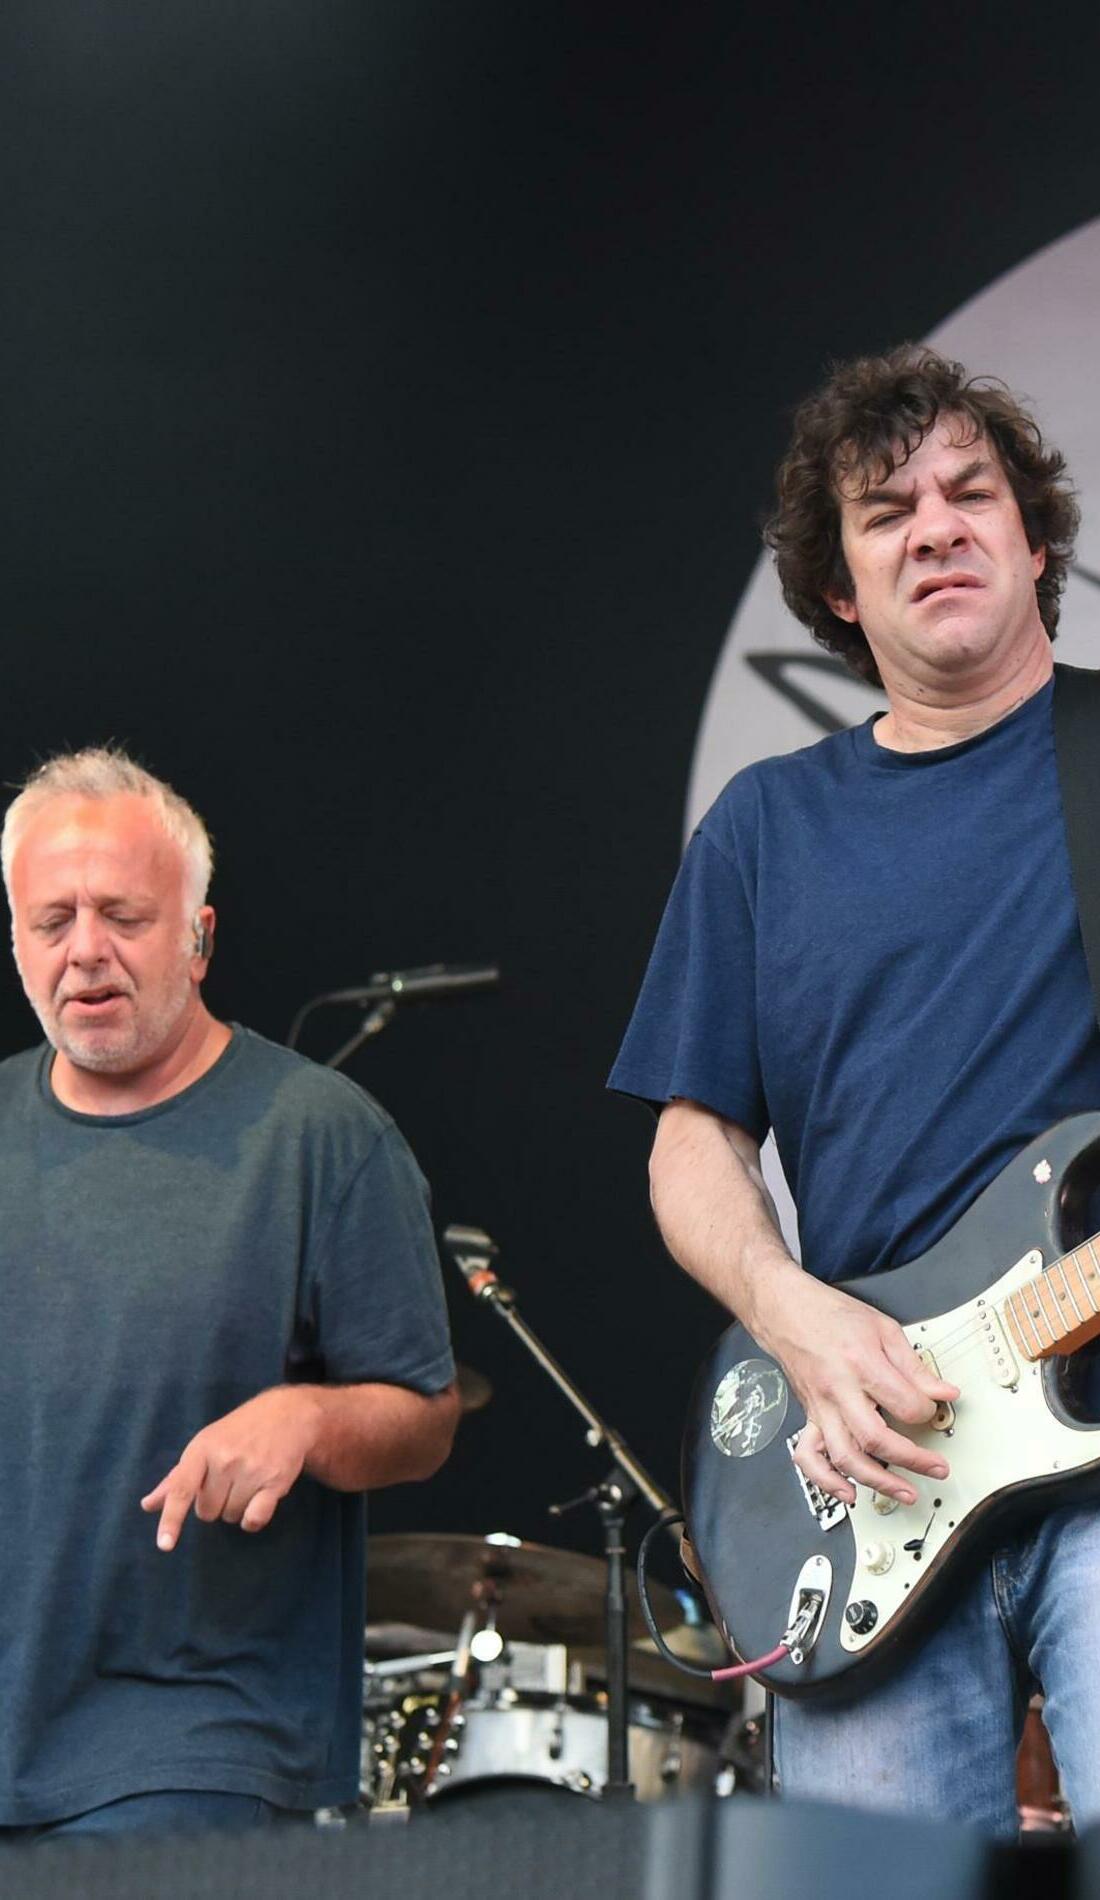 A Ween live event